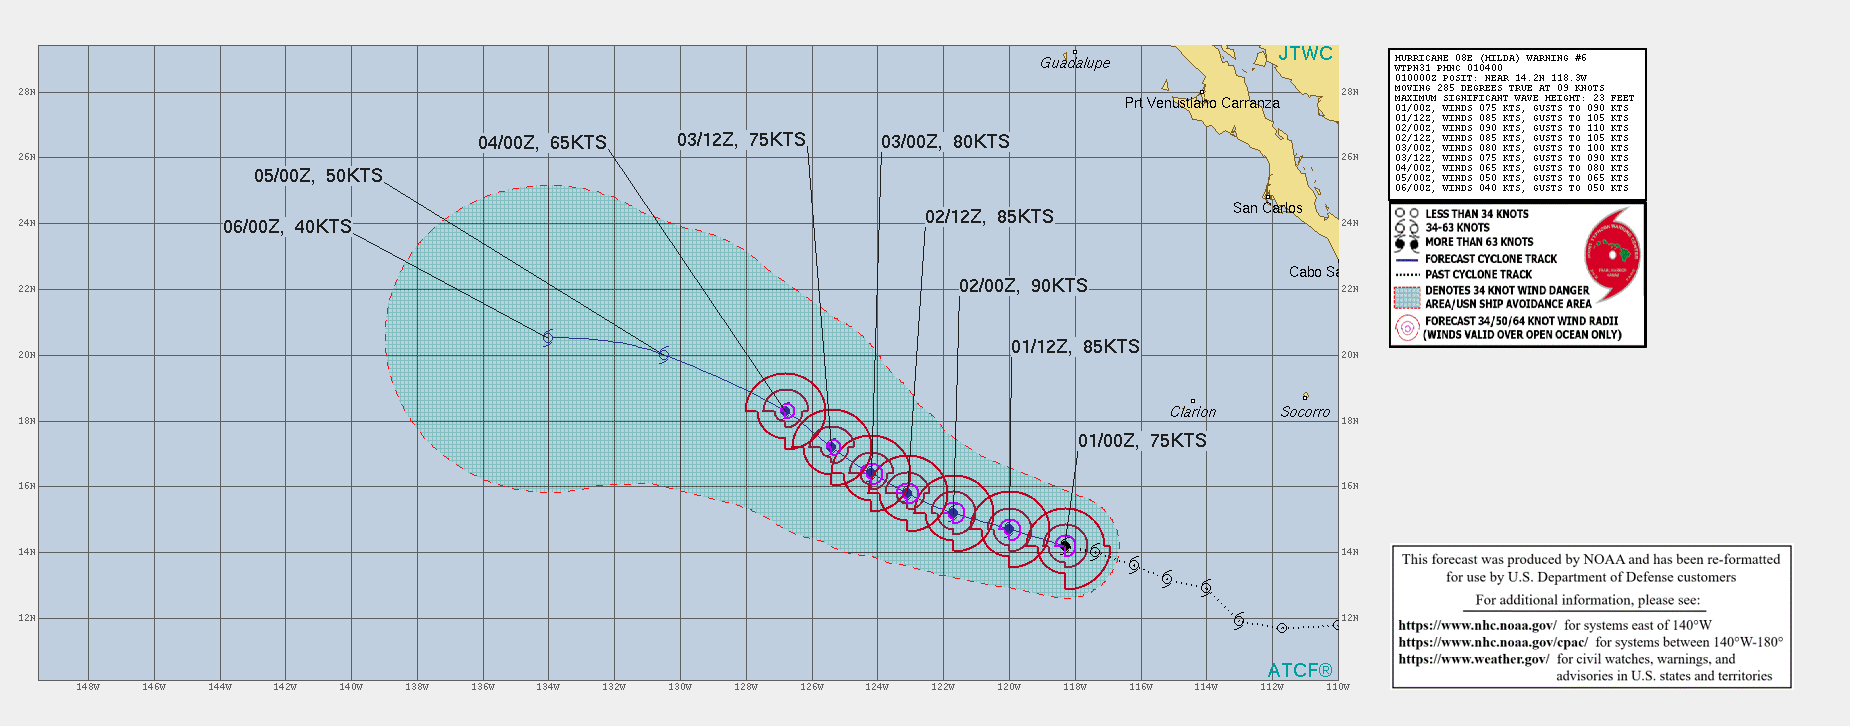 EASTERN PACIFIC. HU 08E(HILDA). WARNING 6 ISSUED AT 01/04UTC. INTENSITY IS FORECAST TO PEAK AT 90KNOTS/CAT 2 BY 24H.